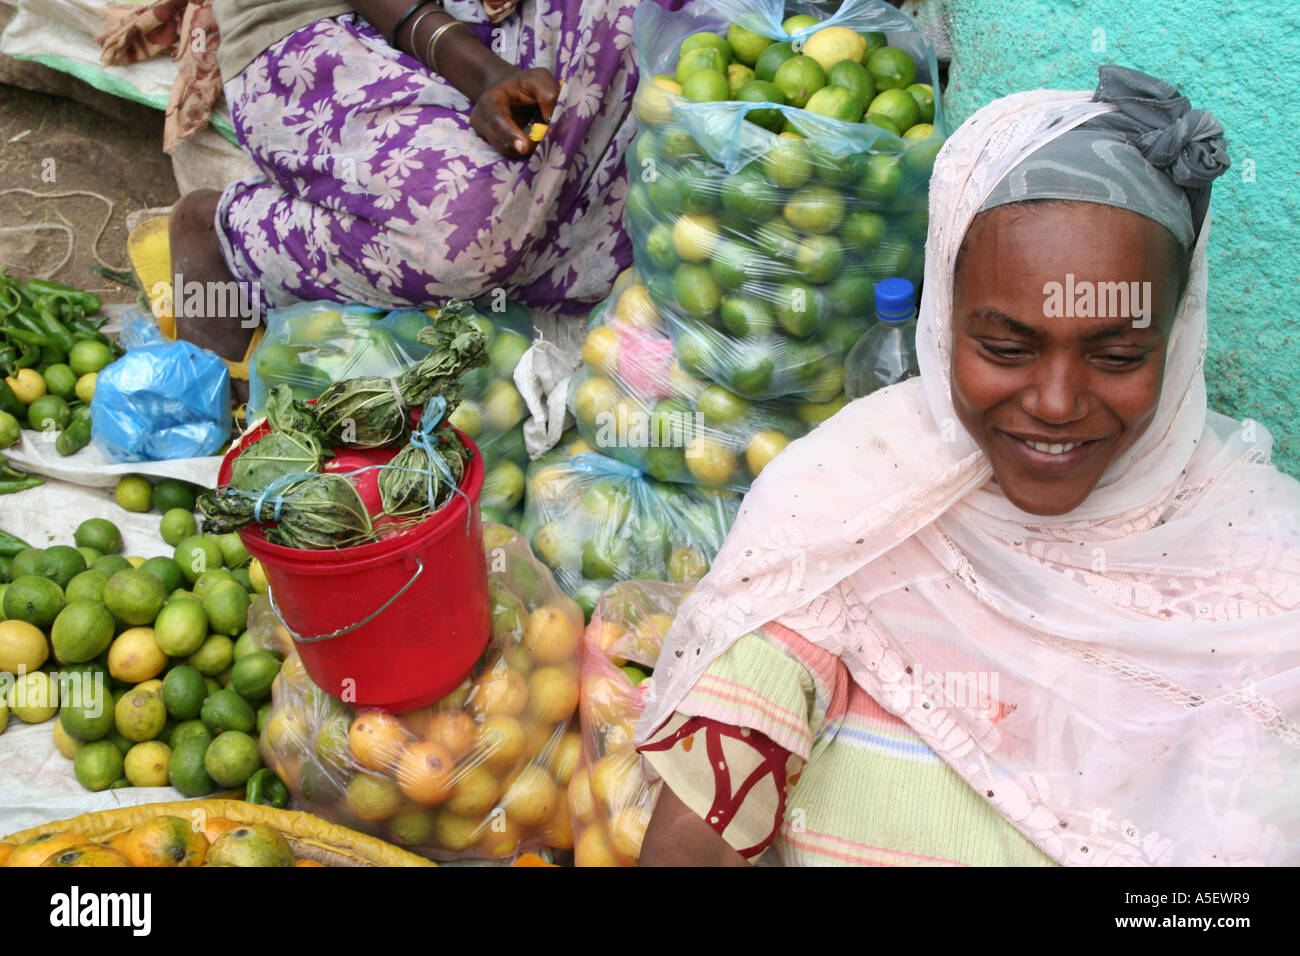 Harar, Ethiopia, woman selling fruit in a market Stock Photo